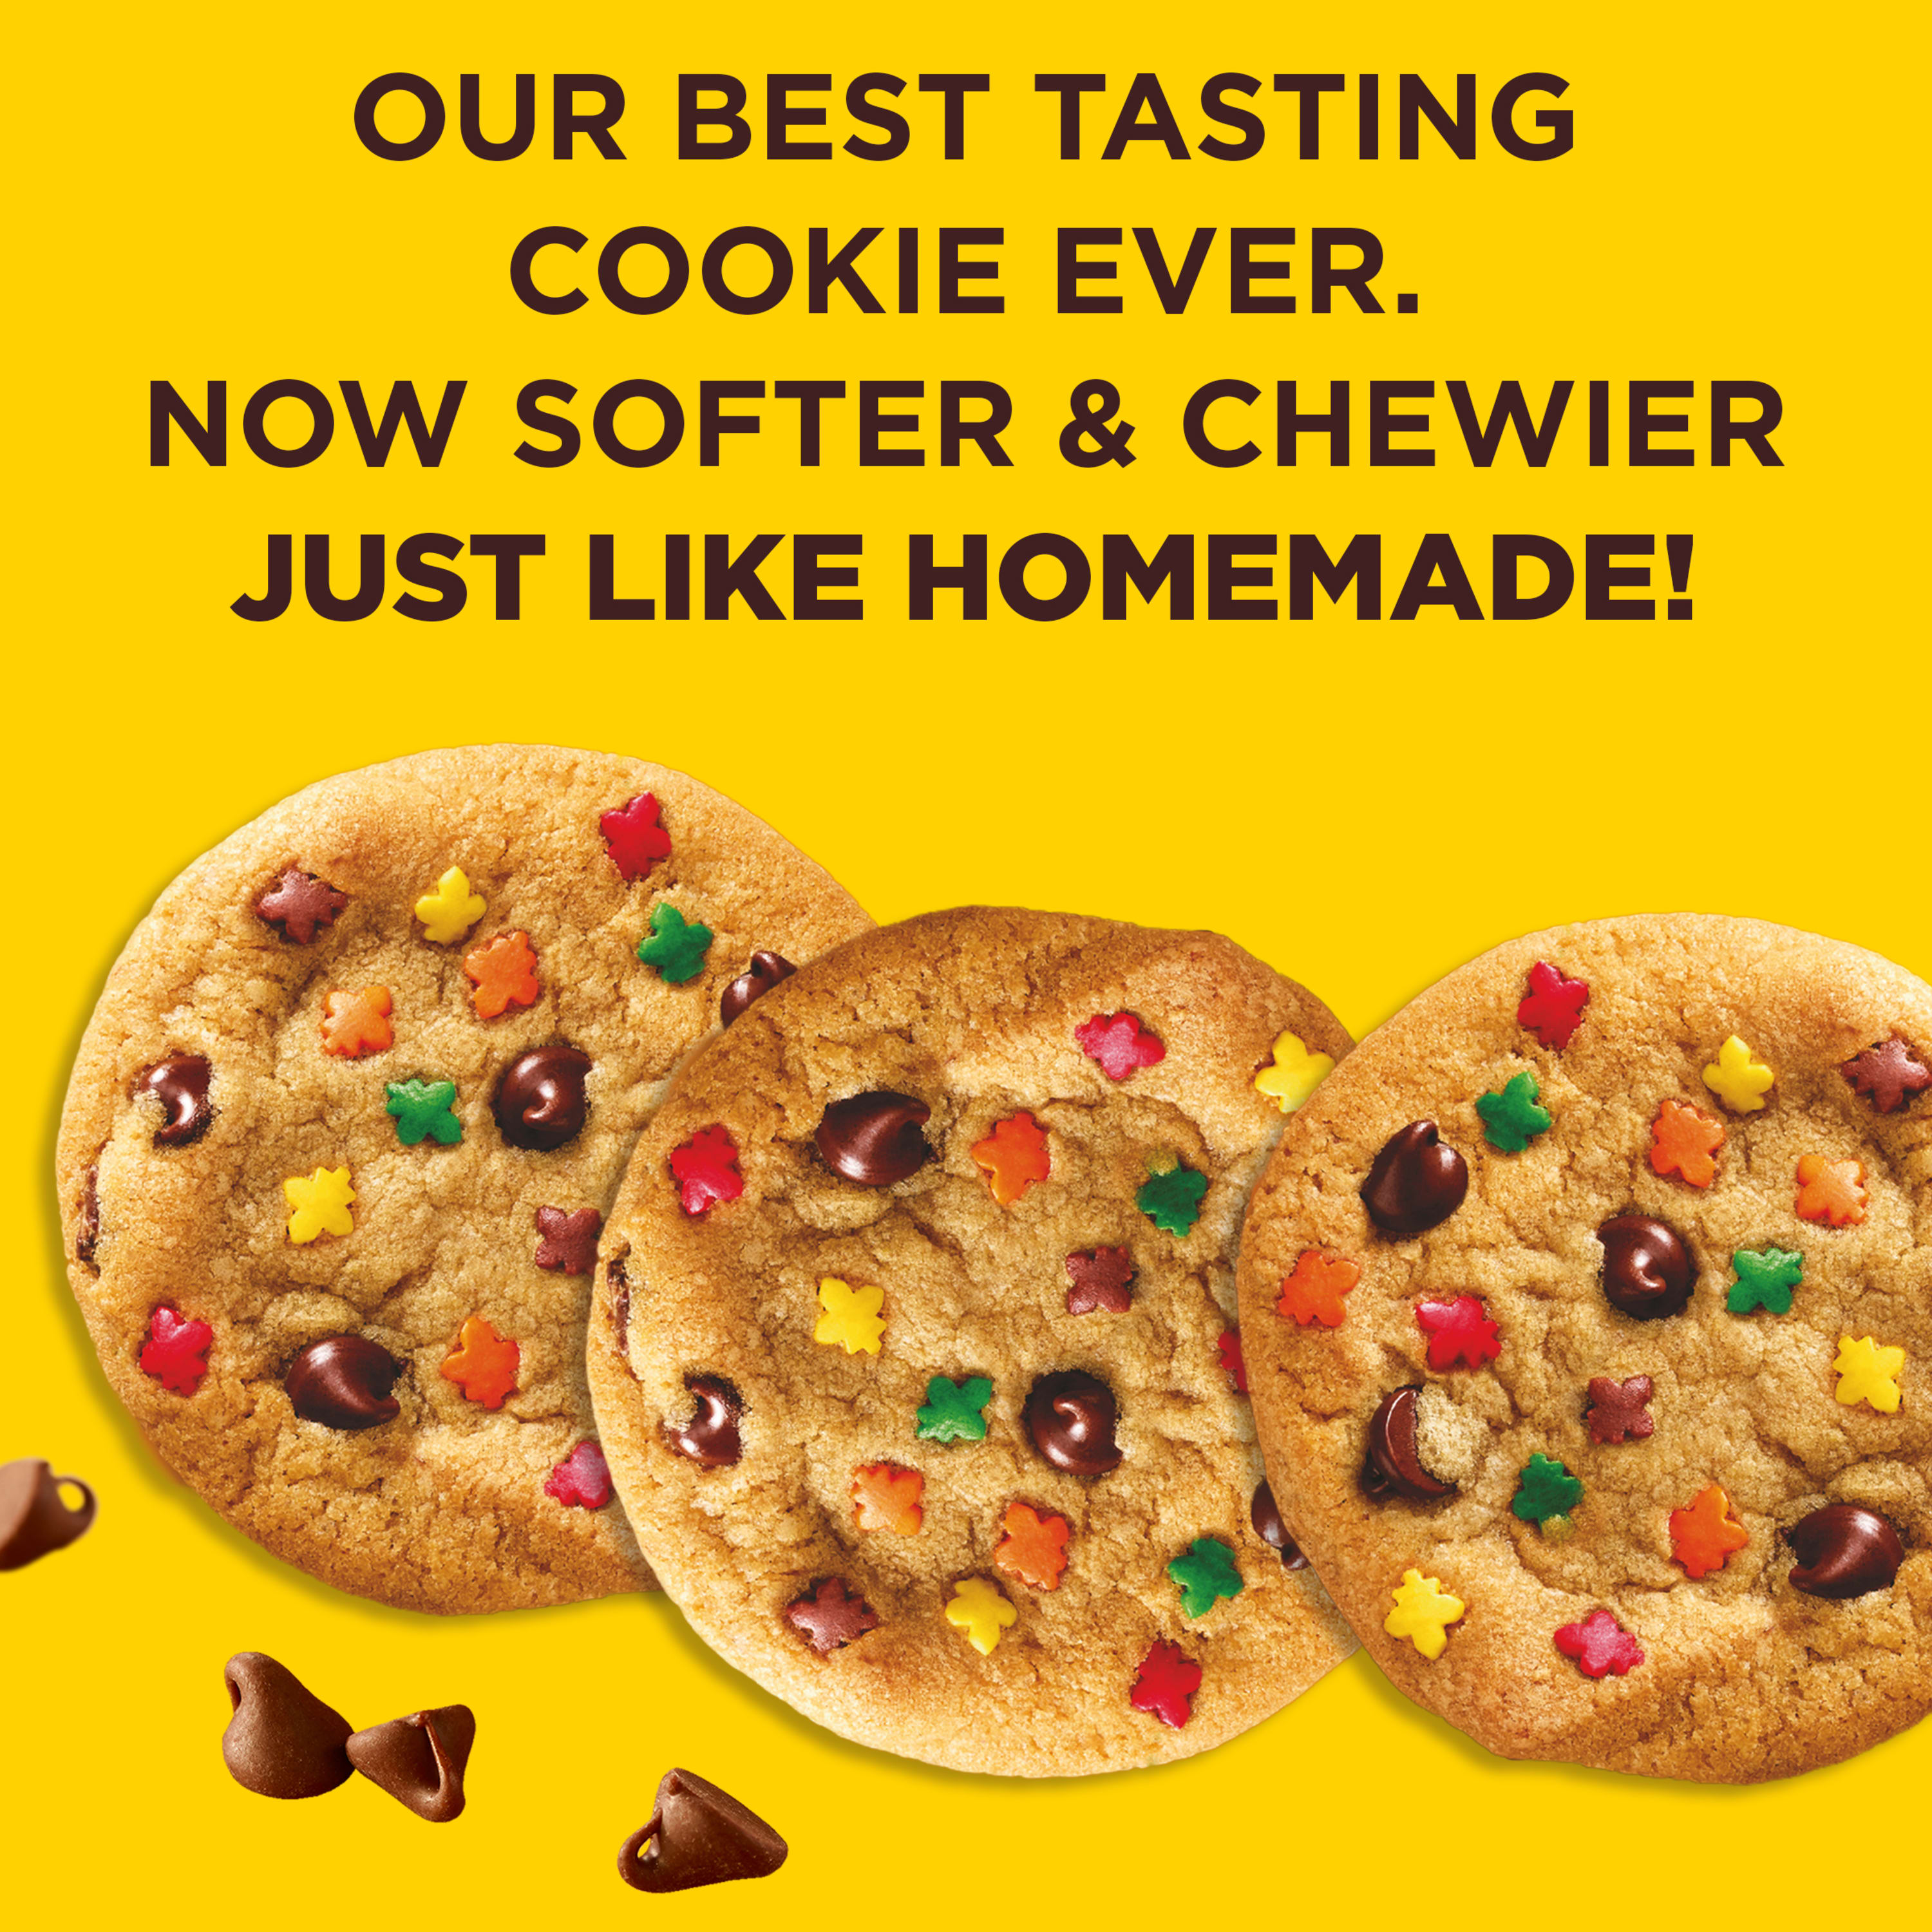 Nestle Toll House Fall'n Leaves Chocolate Chip Cookie Dough 0.999 lb. - image 5 of 10